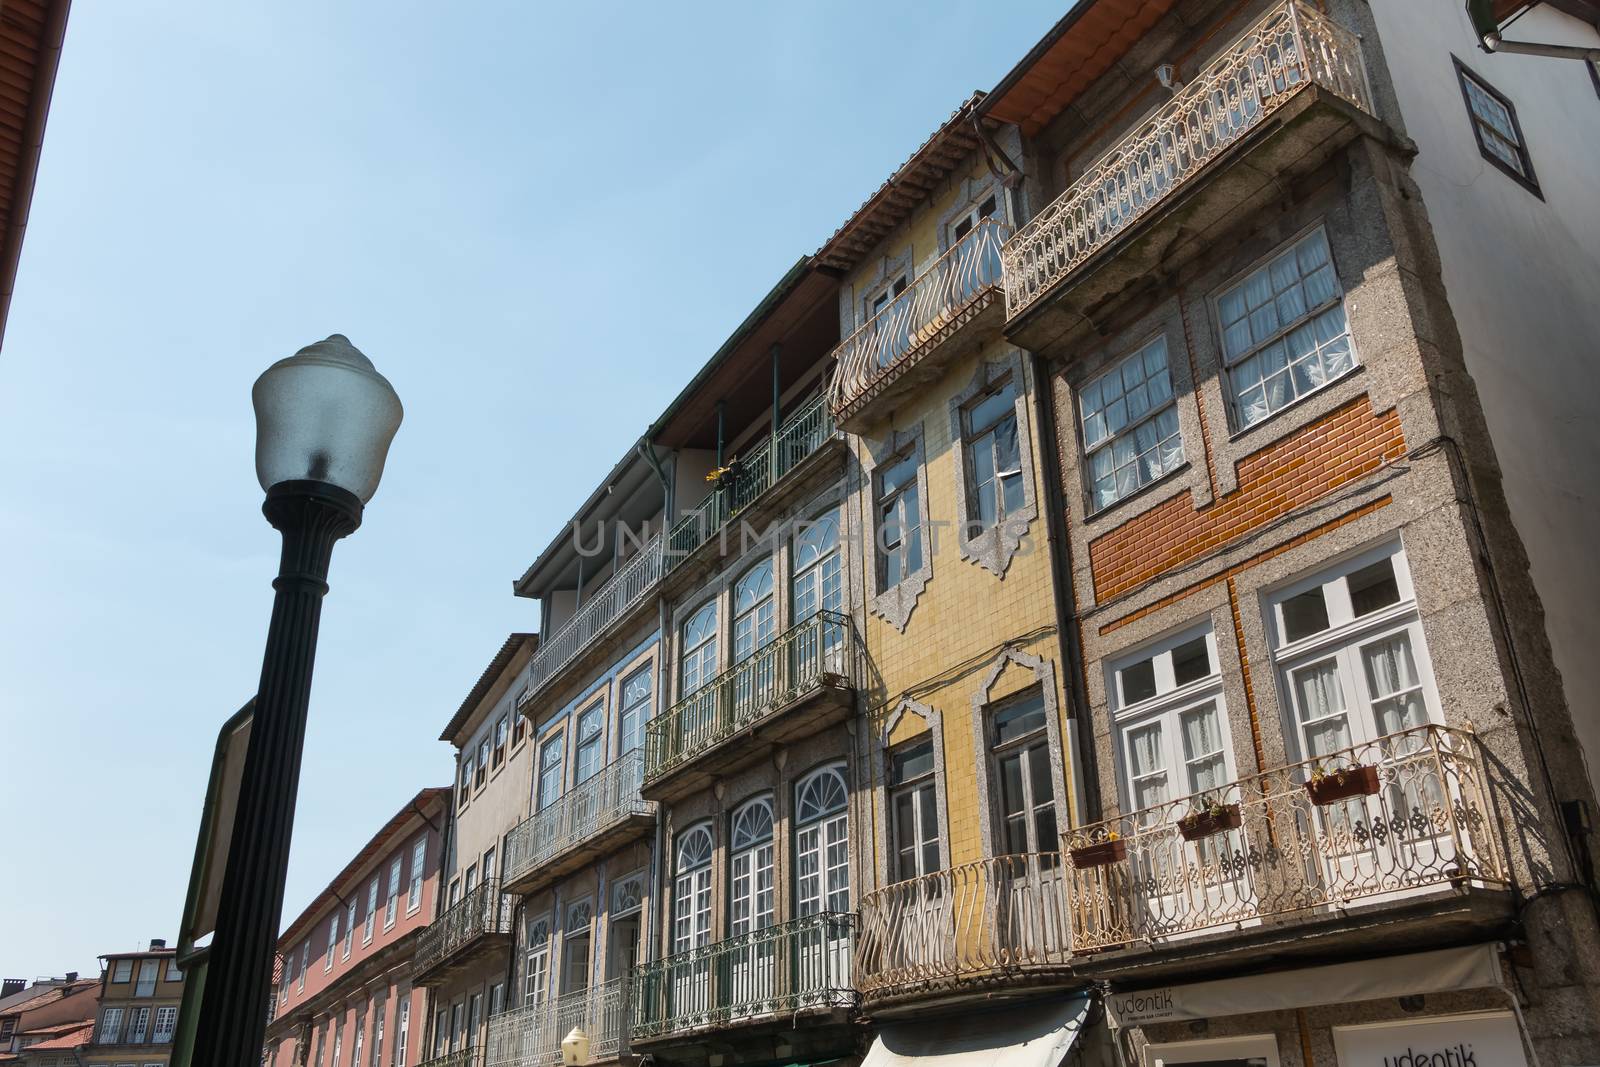 Architecture detail of houses typical of guimaraes, portugal by AtlanticEUROSTOXX